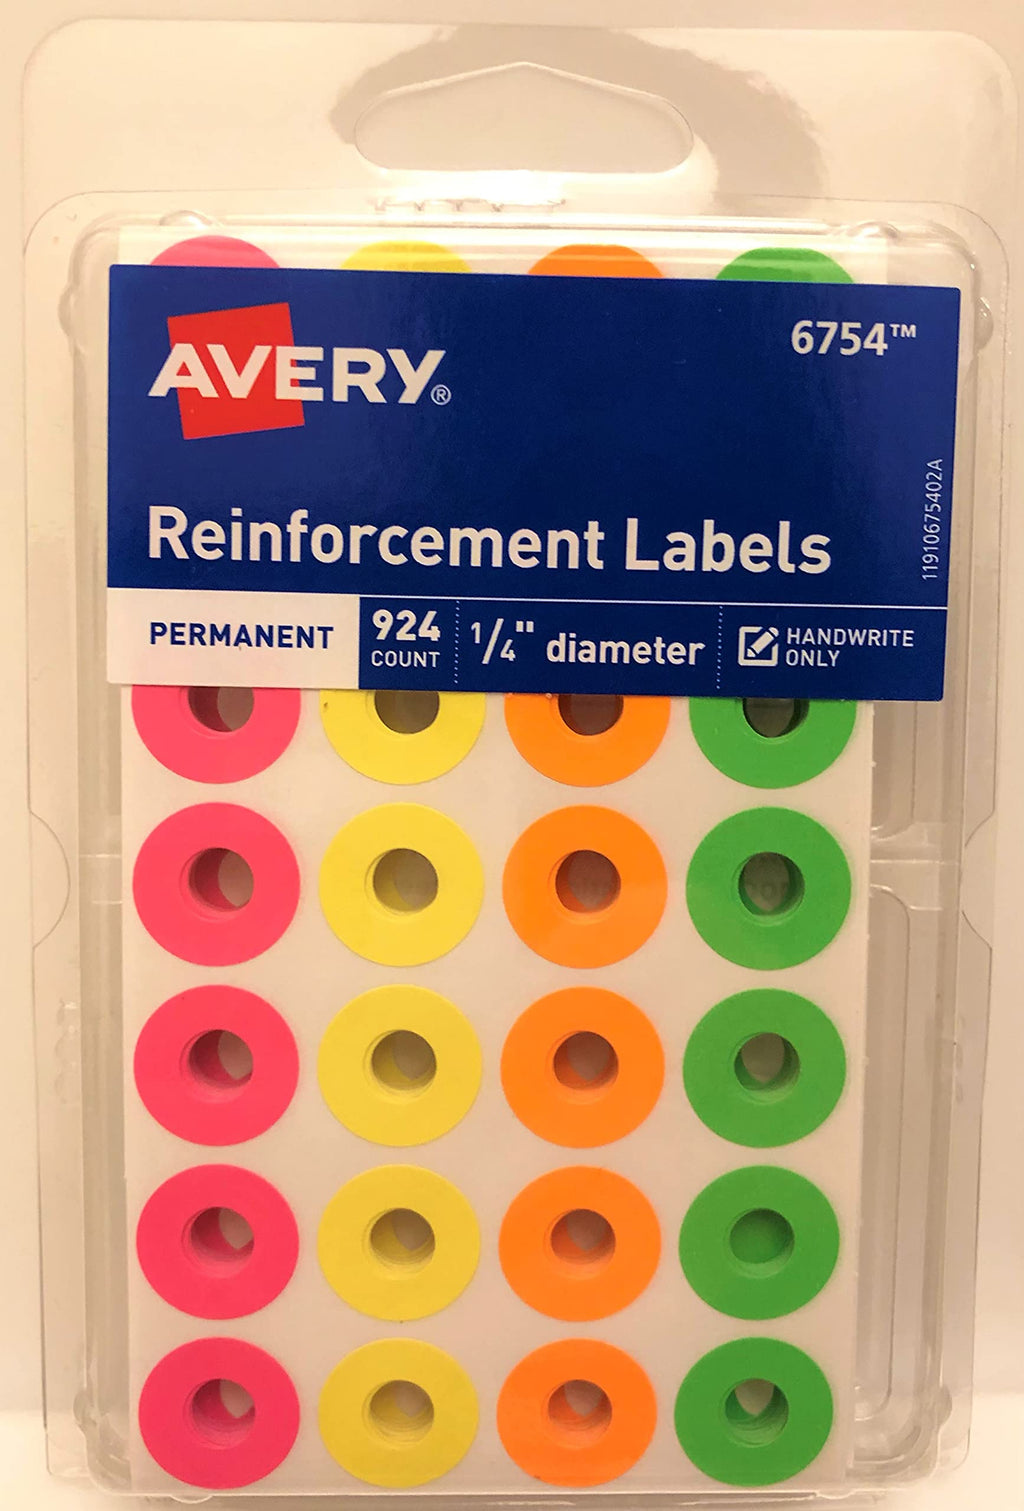 aVERY 924 COUNT 1/4 DIAMITER REINFORCEMENT COLORED LABELS: Permenant Adhesive Sticks & Stays, and Fits Standard Size Punched Holes, - LeoForward Australia